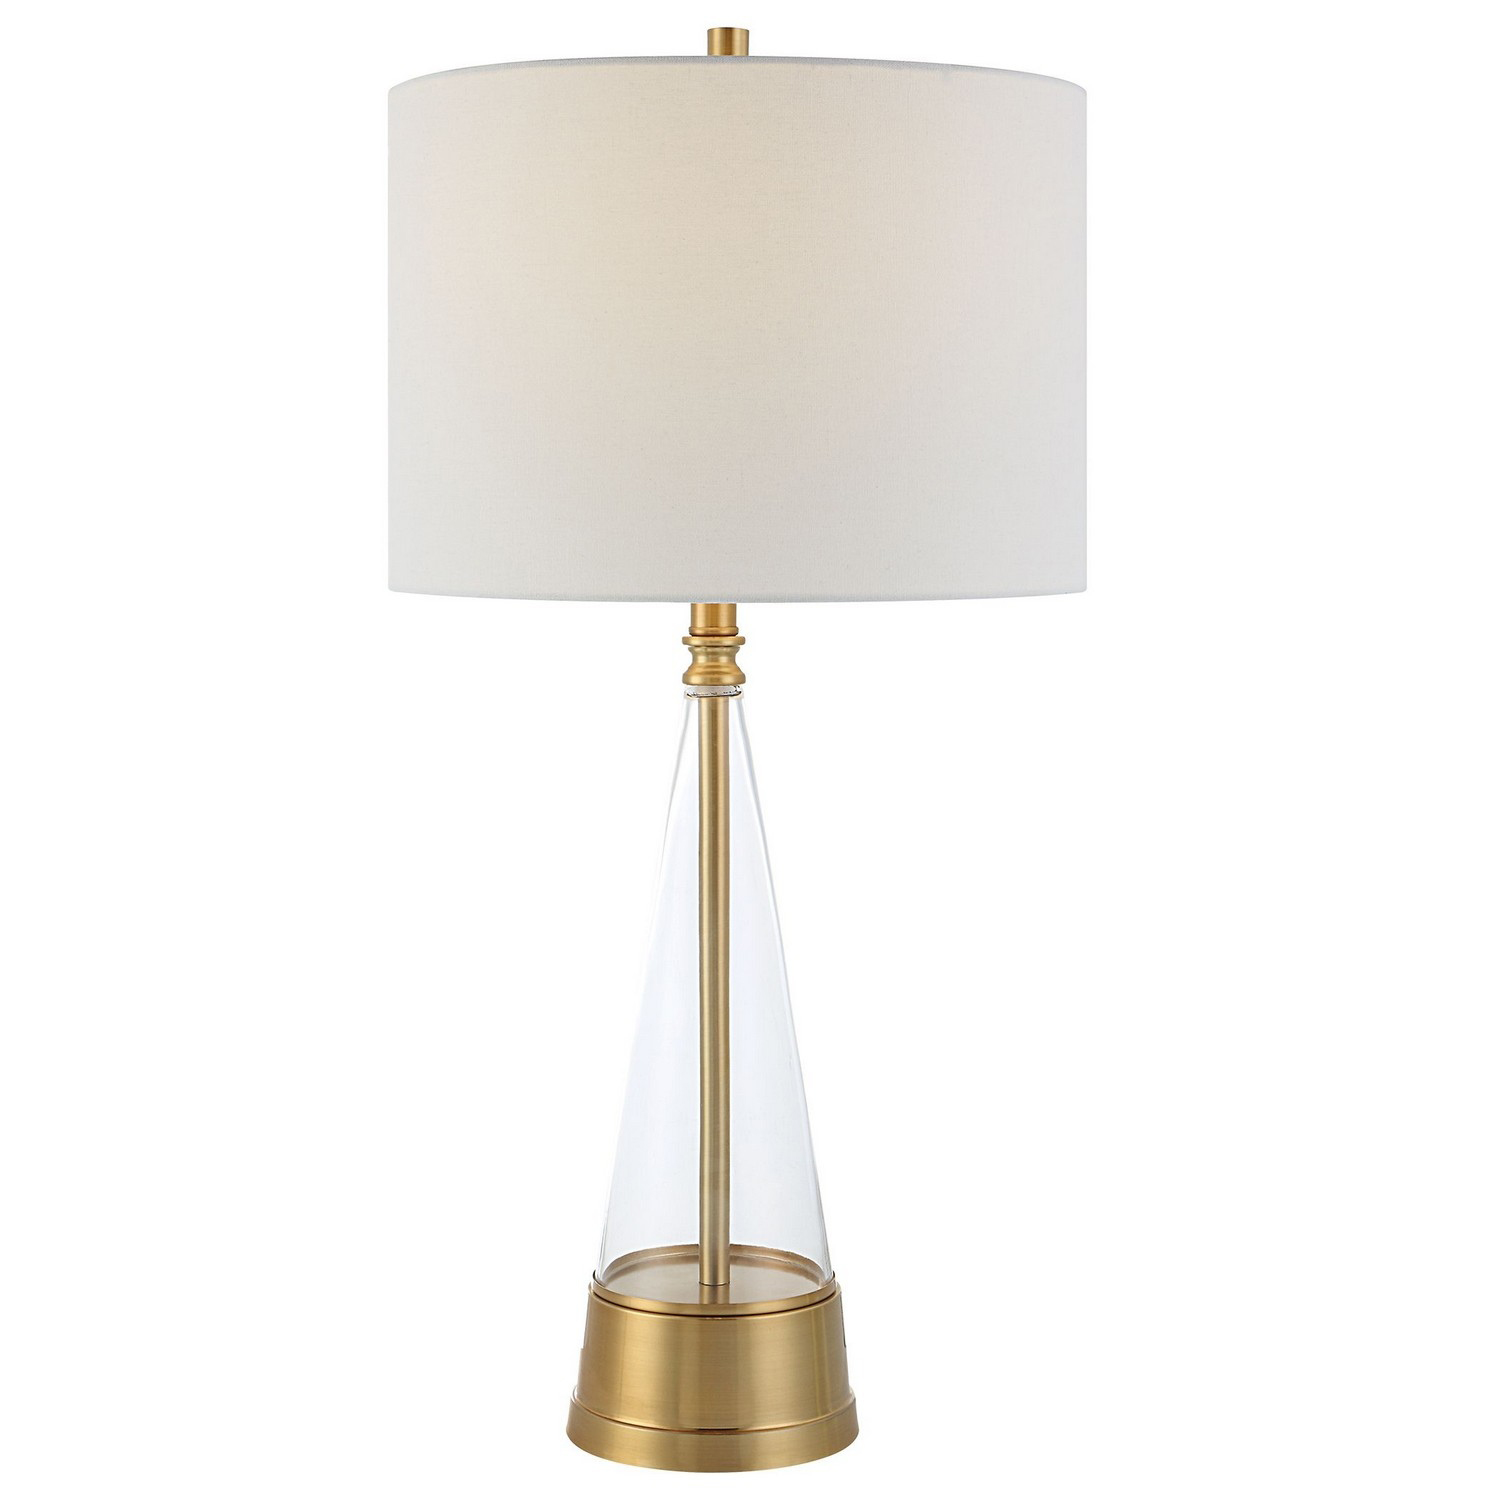 Uttermost W26092-1 Table Lamp - Antique Brass